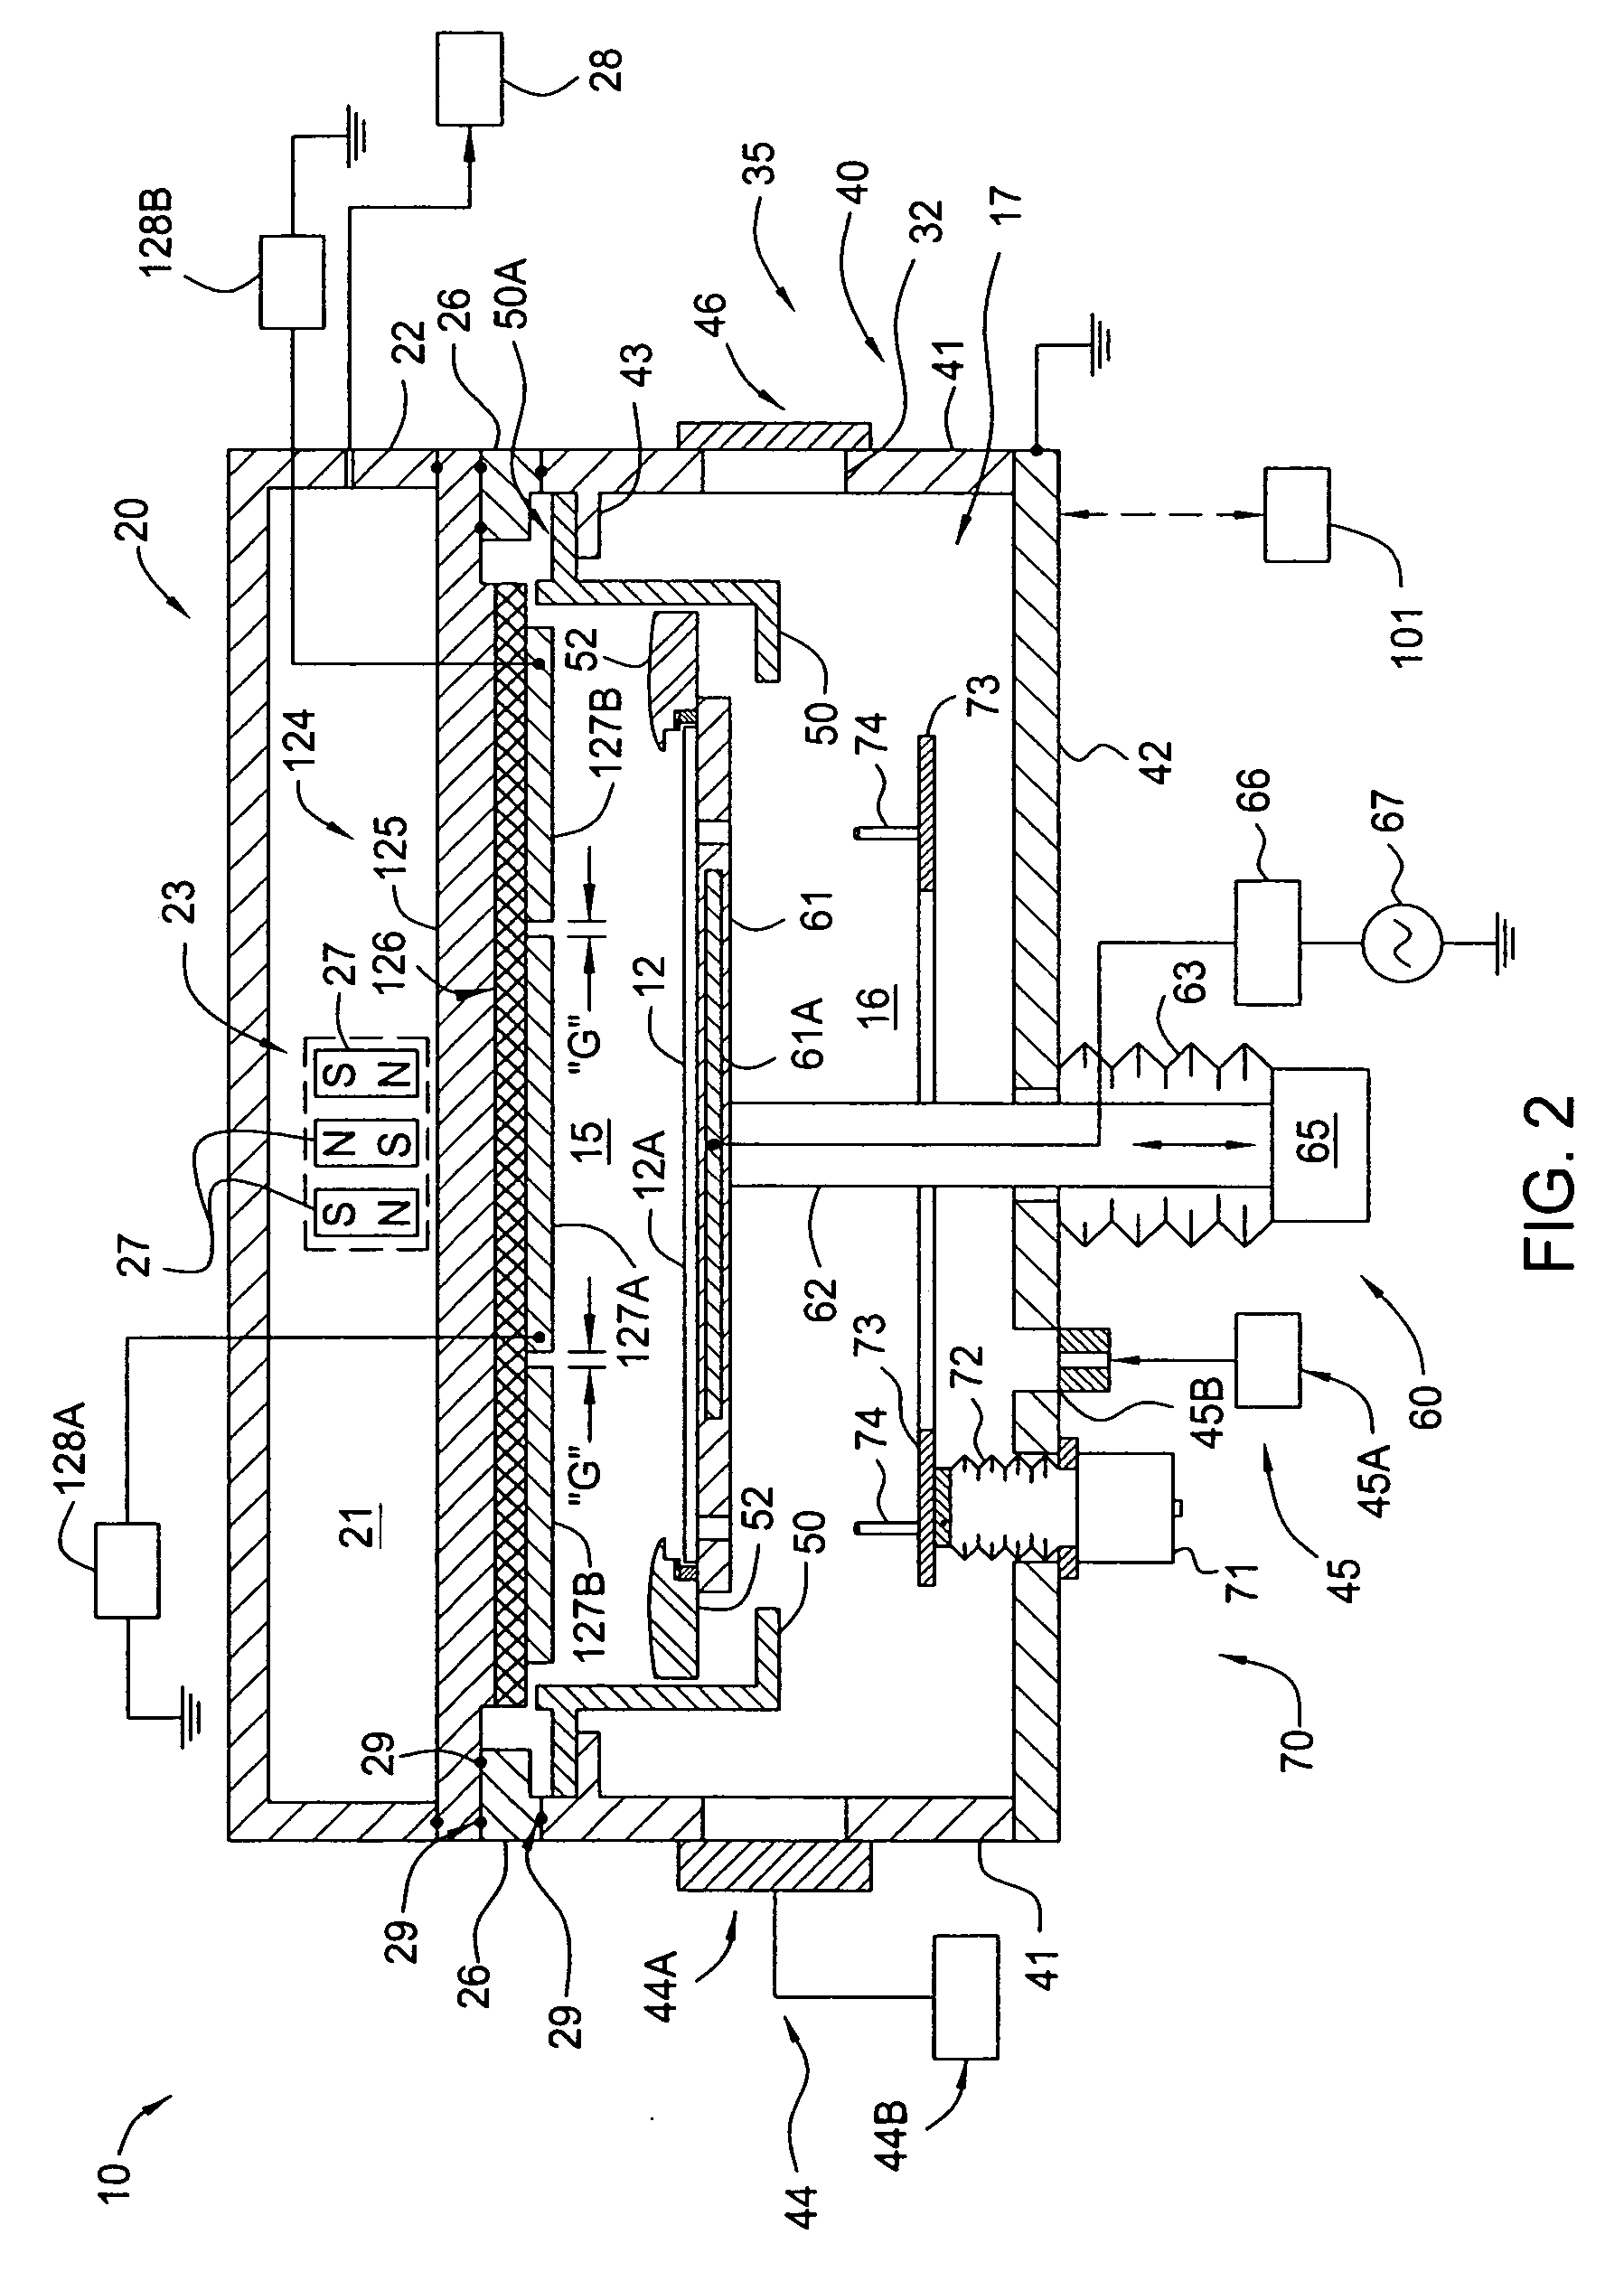 Method of processing a substrate using a large-area magnetron sputtering chamber with individually controlled sputtering zones